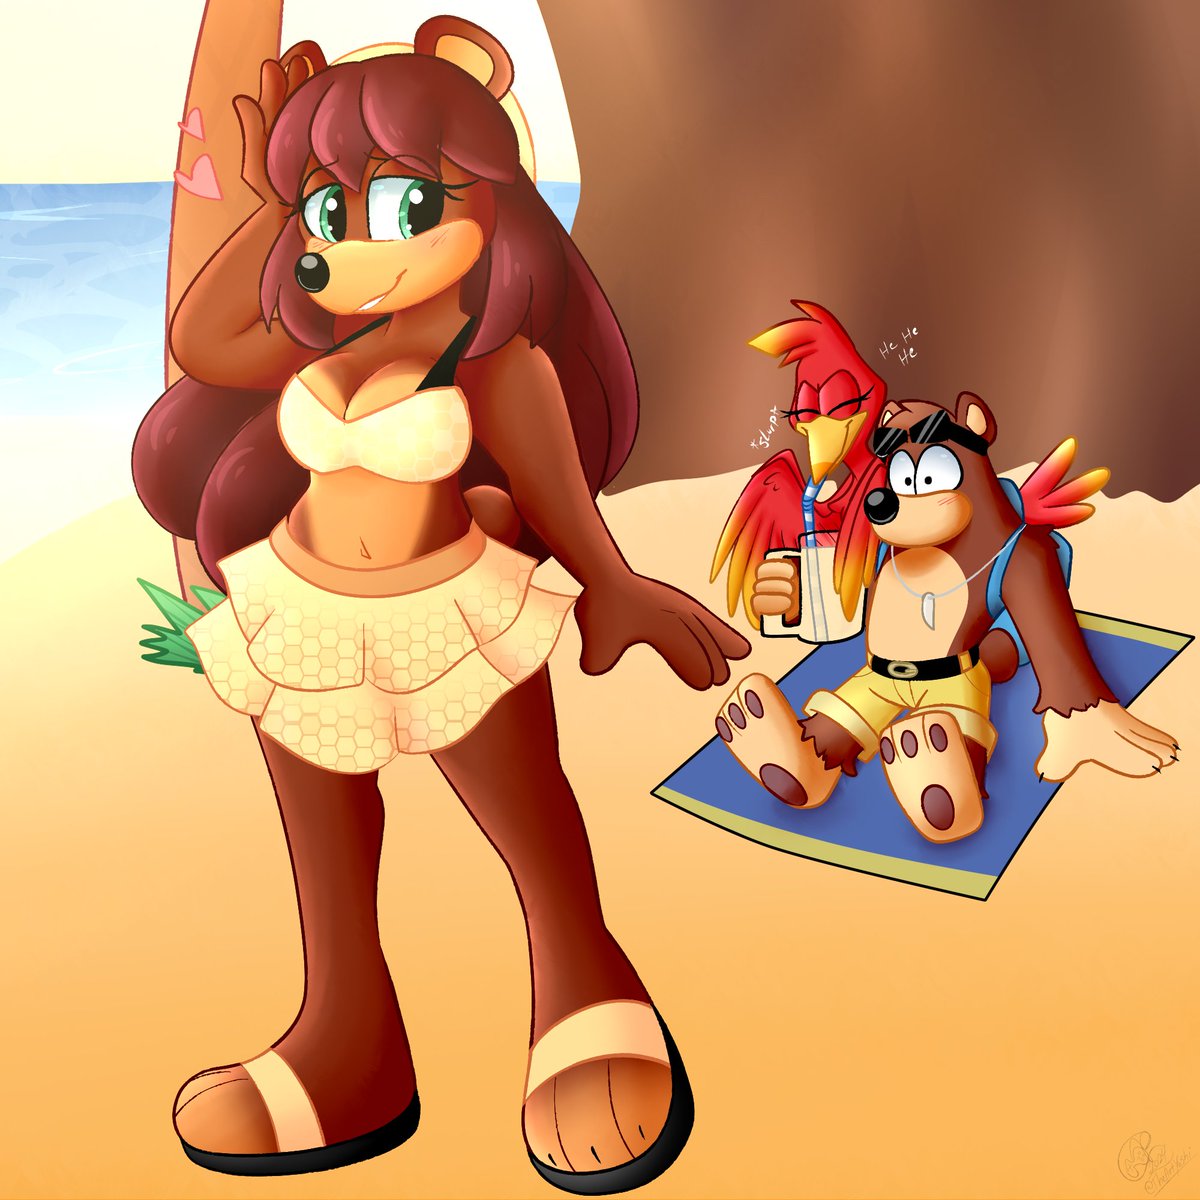 since its almost summer, here is an early pic of Maple at the beach ✨💖

#BanjoKazooie #rareware #BanjoandKazooie